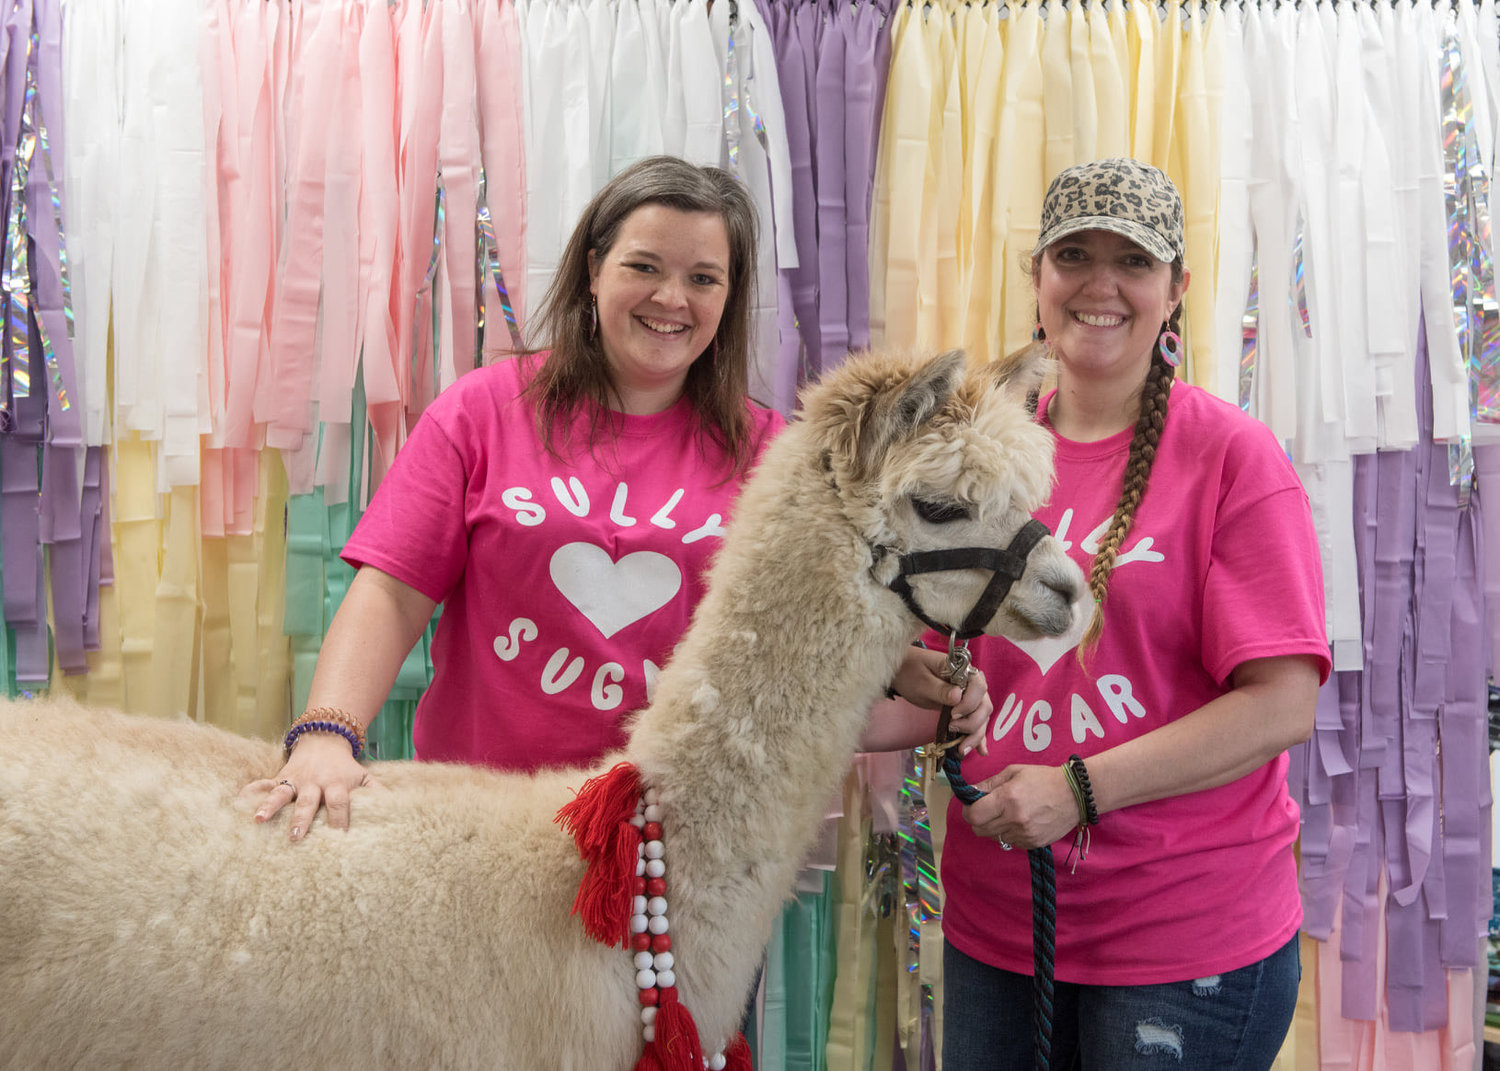 From microchipping events to the annual summer sidewalk sale there is always a fun event in the works at Sully Loves Sugar. Morgan Fields (left) and Stroup (right) pose with a llama during one of the events.